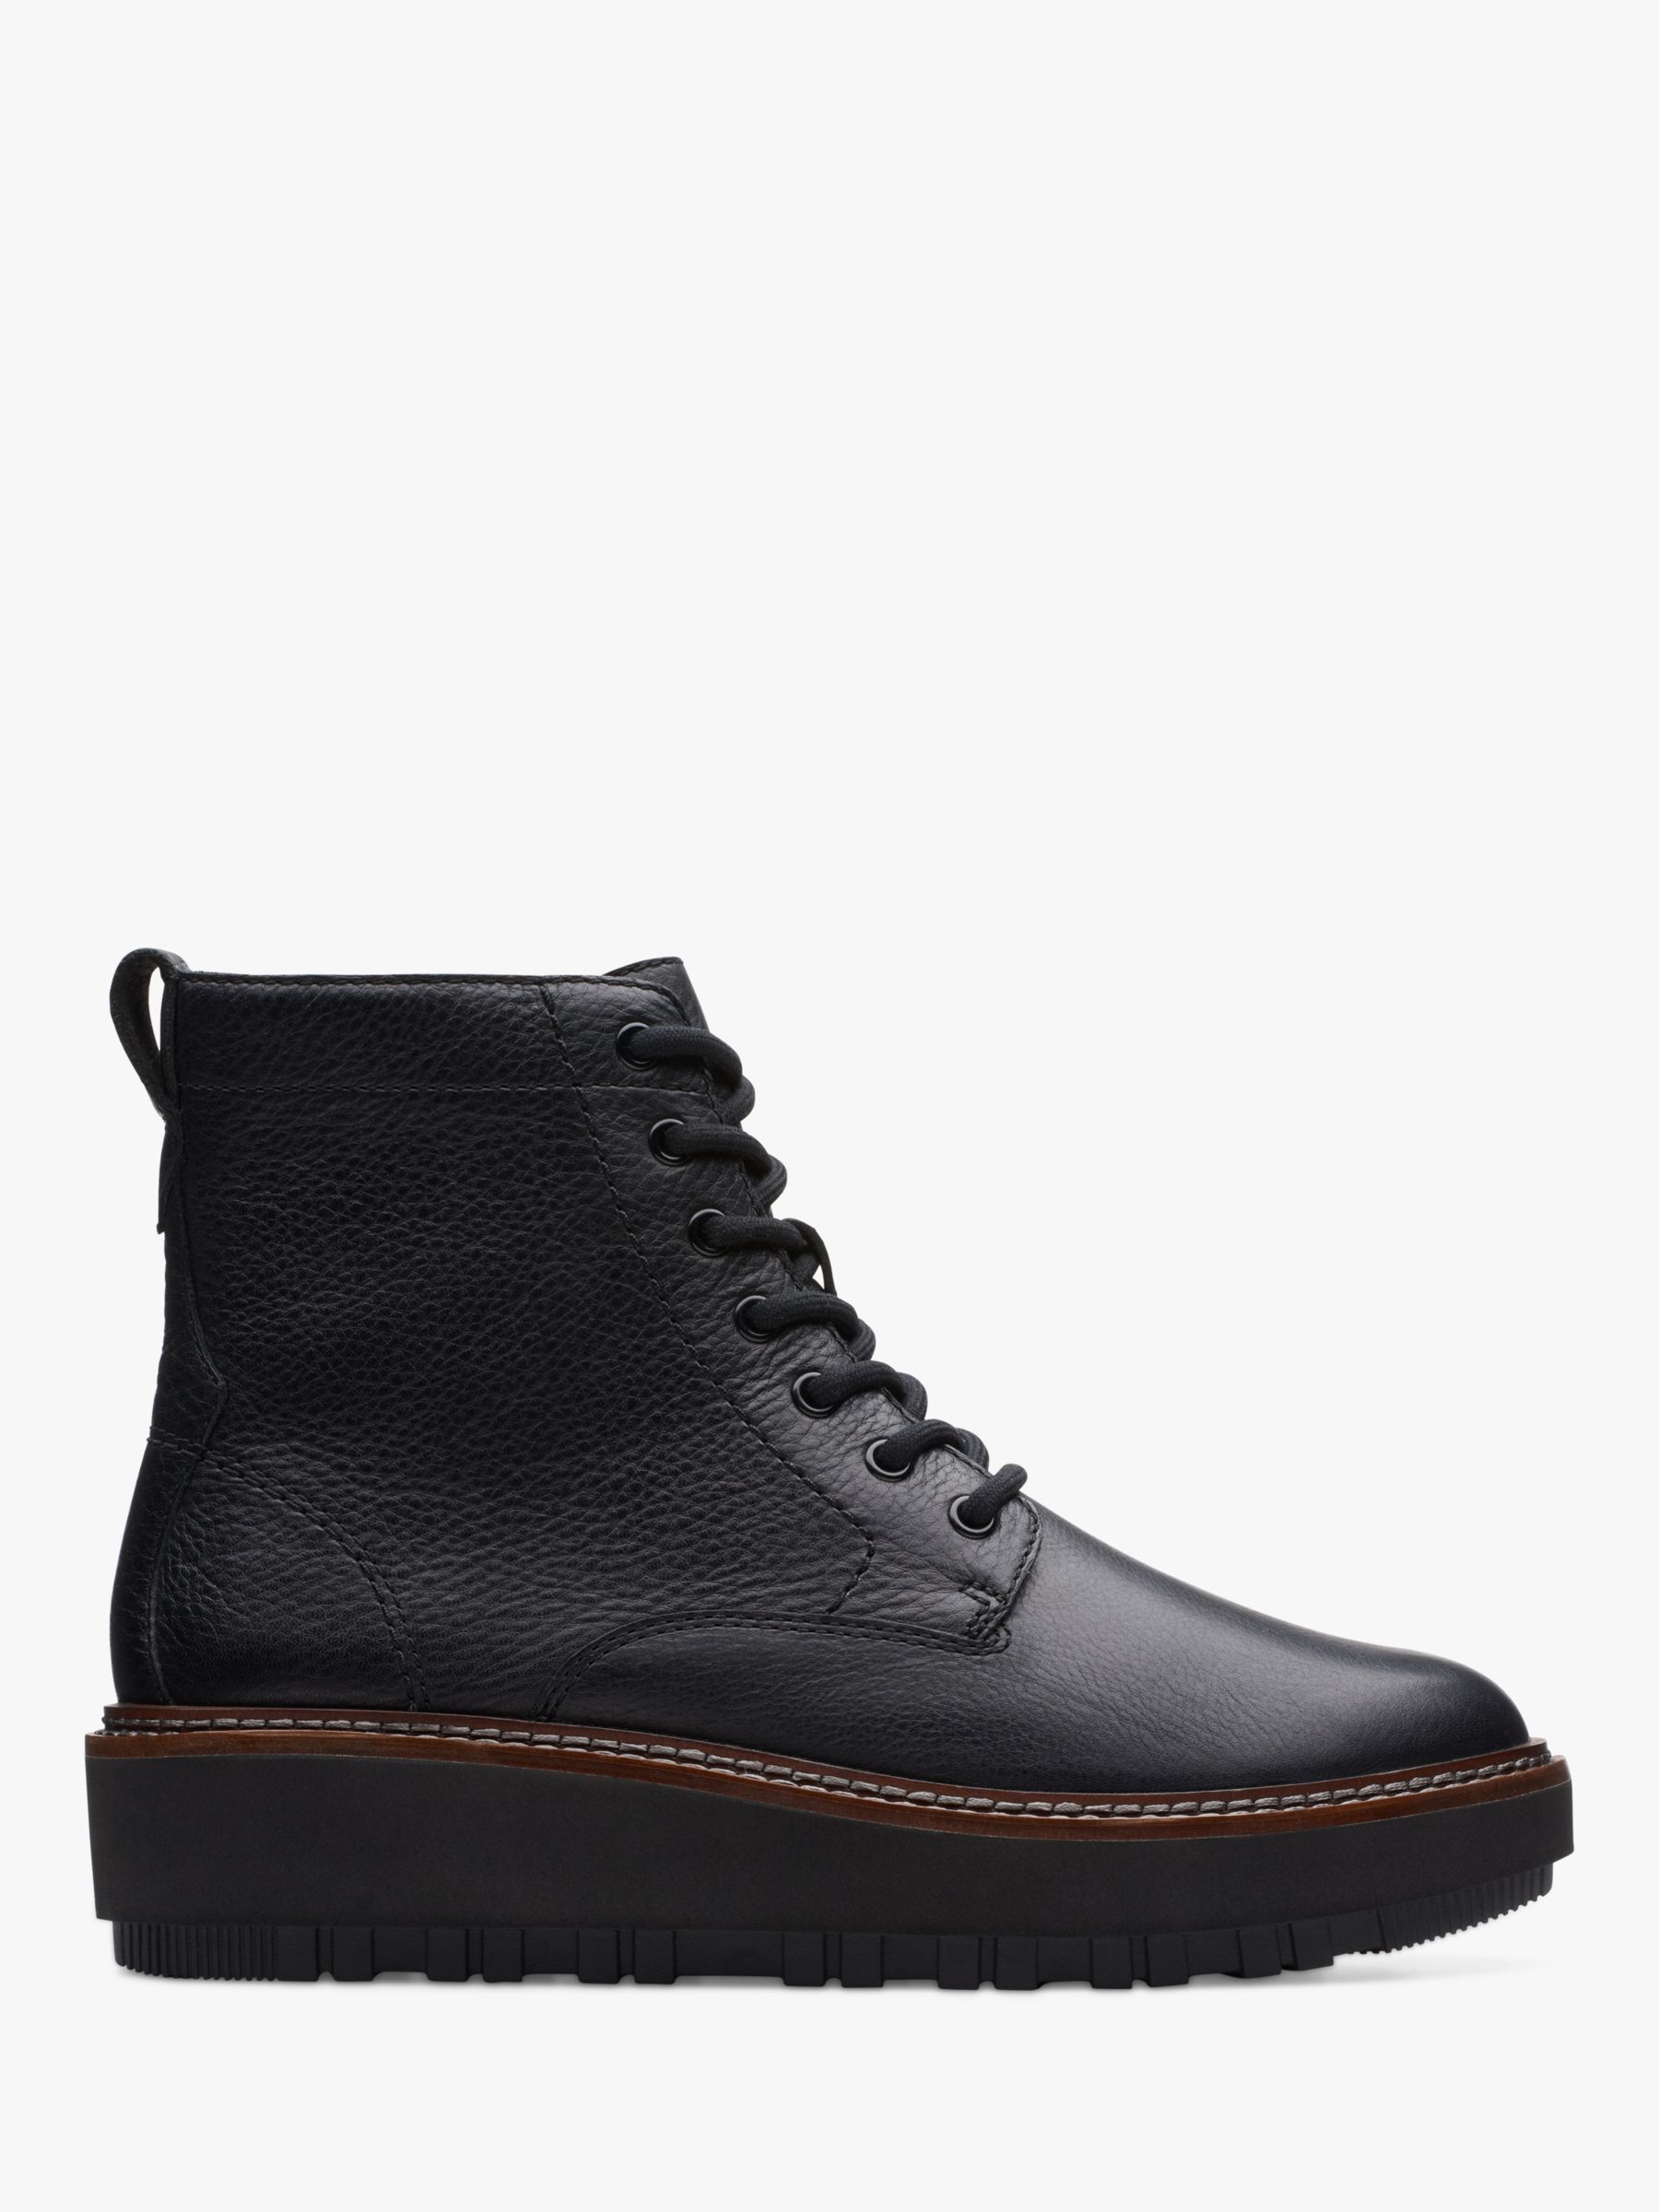 Clarks Orianna Leather Lace Up Ankle Boots